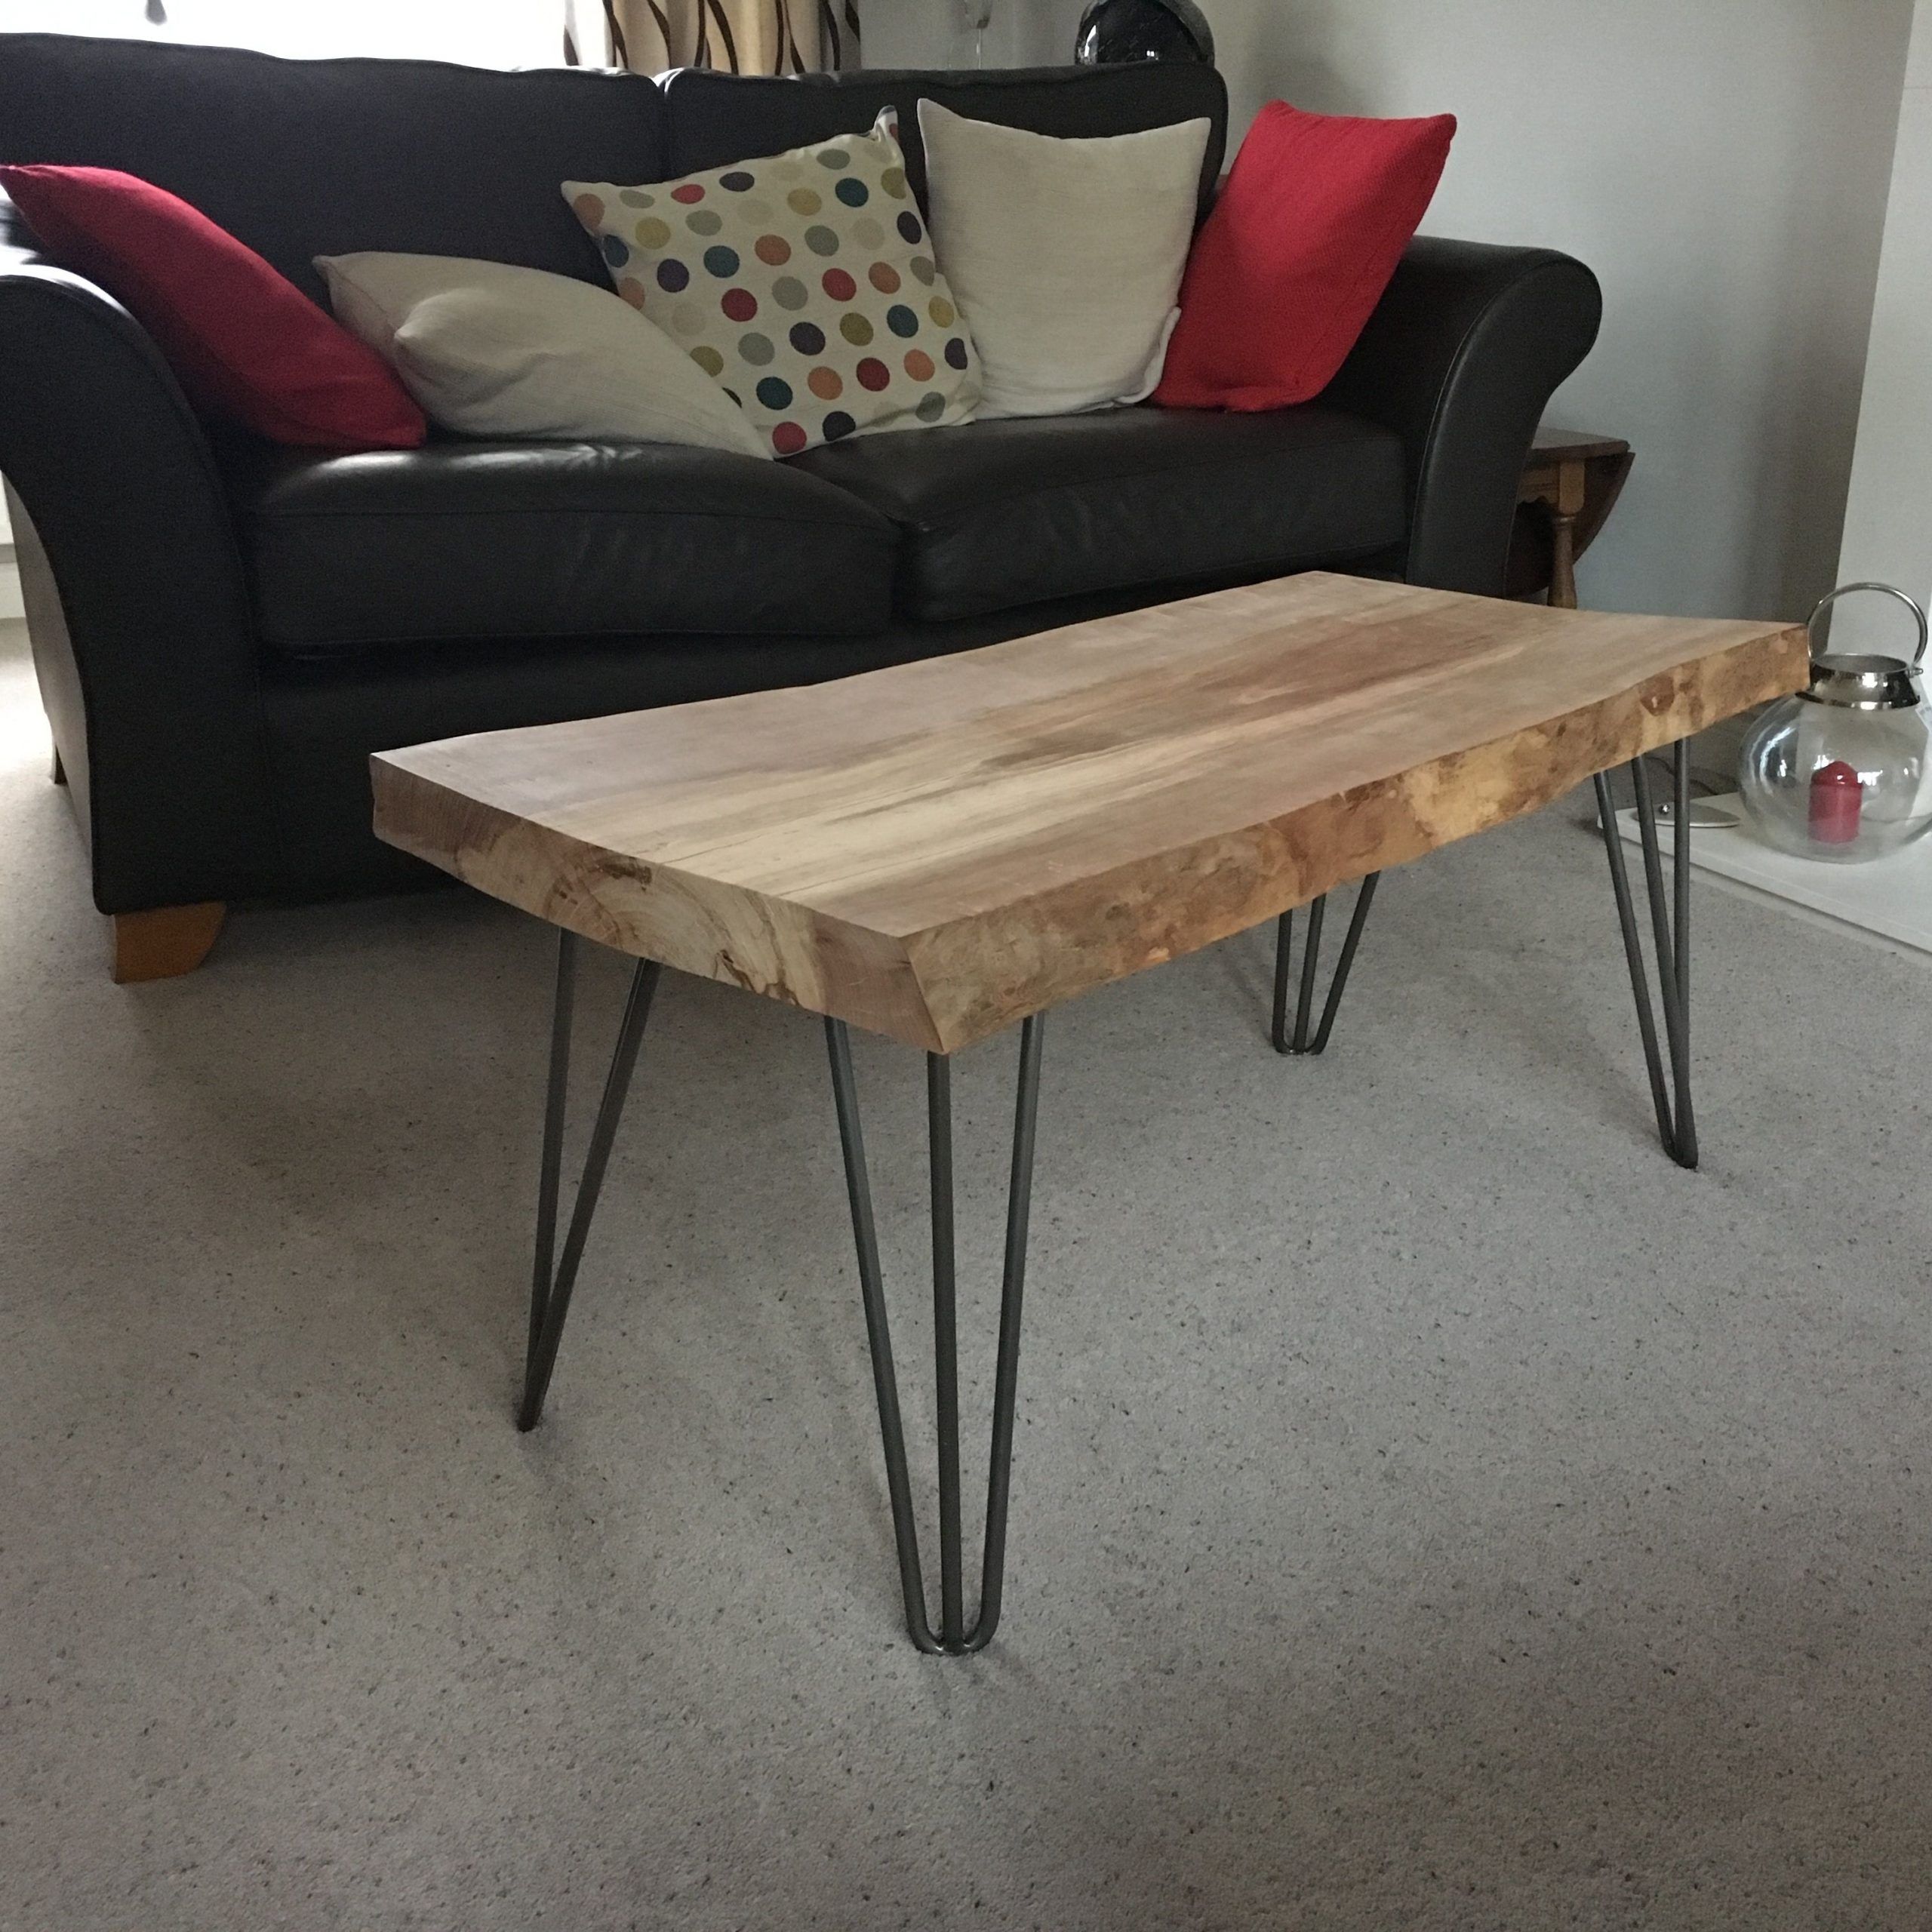 A Unique Coffee Table Made With A Solid Oak Block Of Wood Pertaining To Recent Metal And Oak Coffee Tables (View 3 of 20)